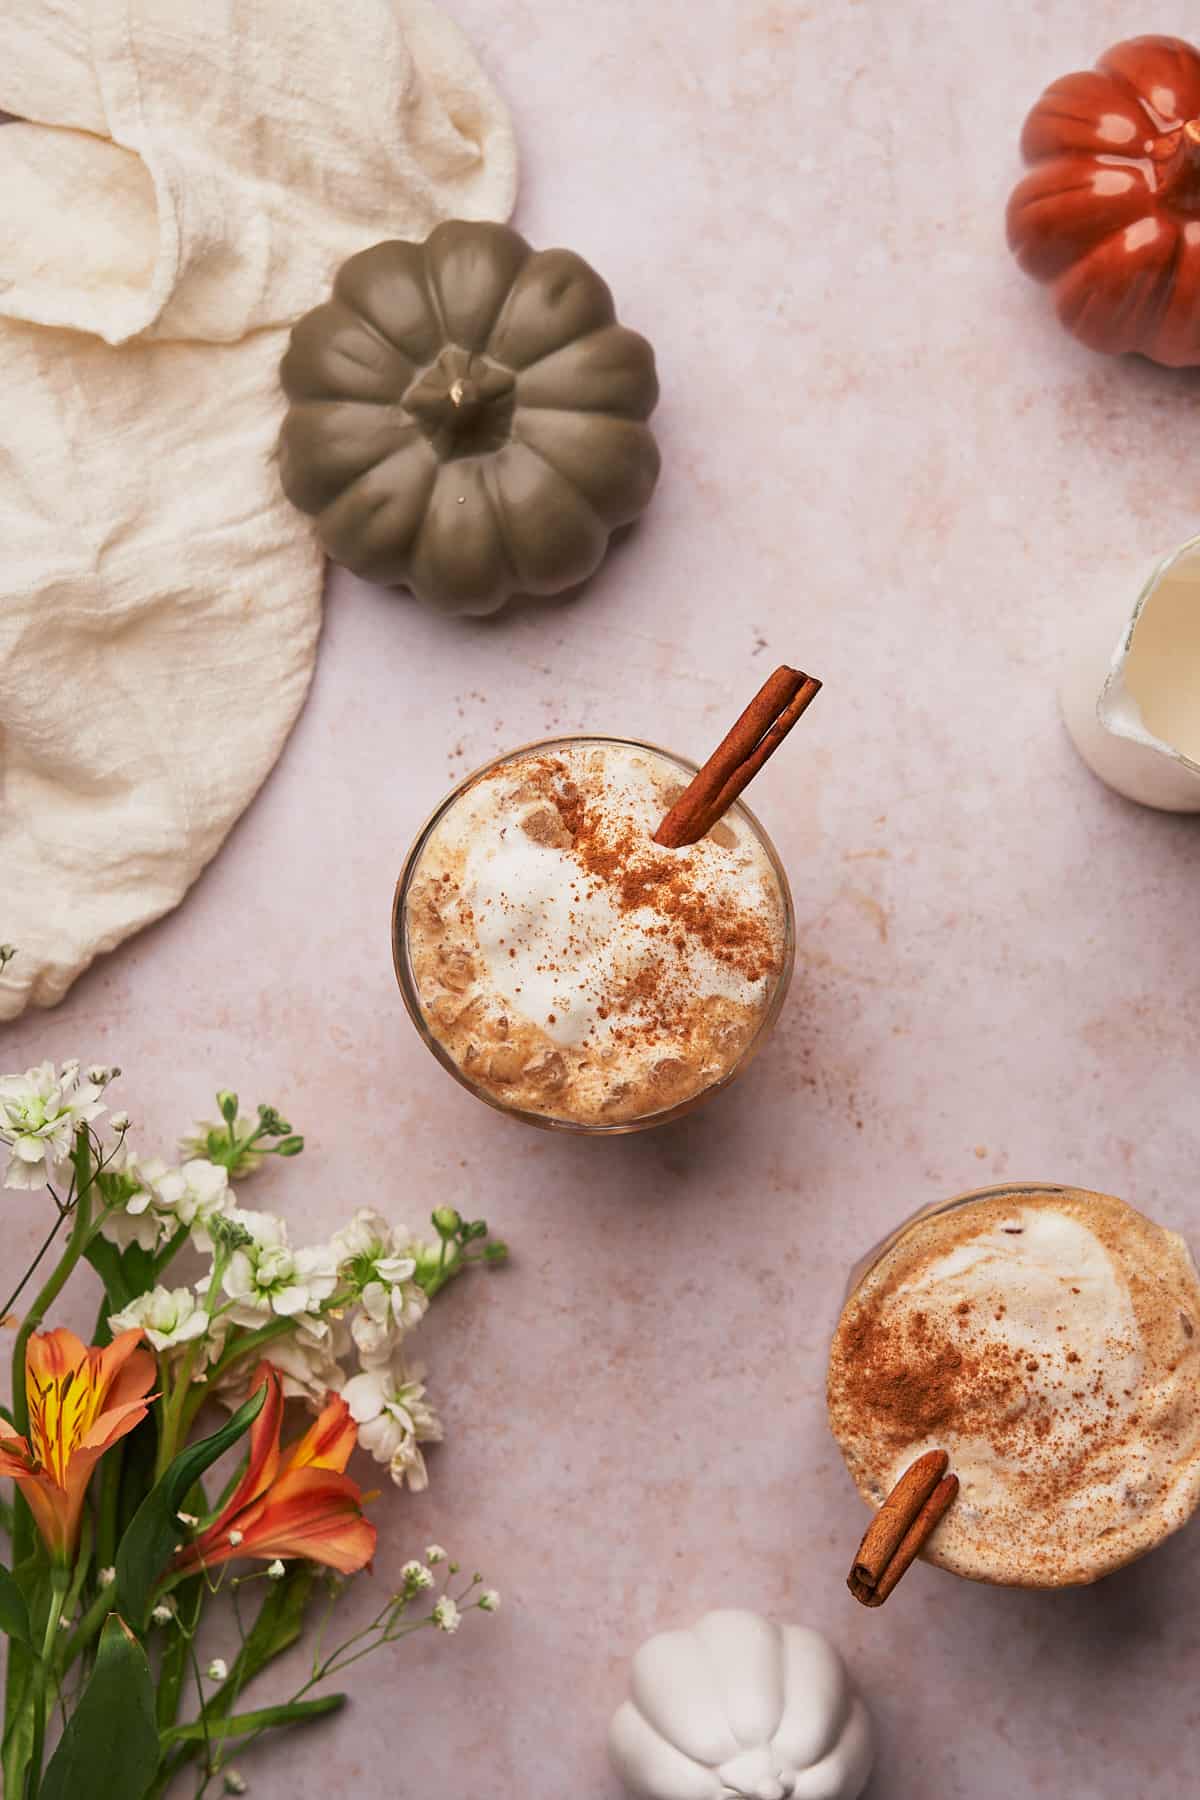 two iced pumpkin spice lattes with cinnamon sticks, and dried cinnamon sprinkled over topm surrounded. by olive green and orange small ceramic gourds and flowers.